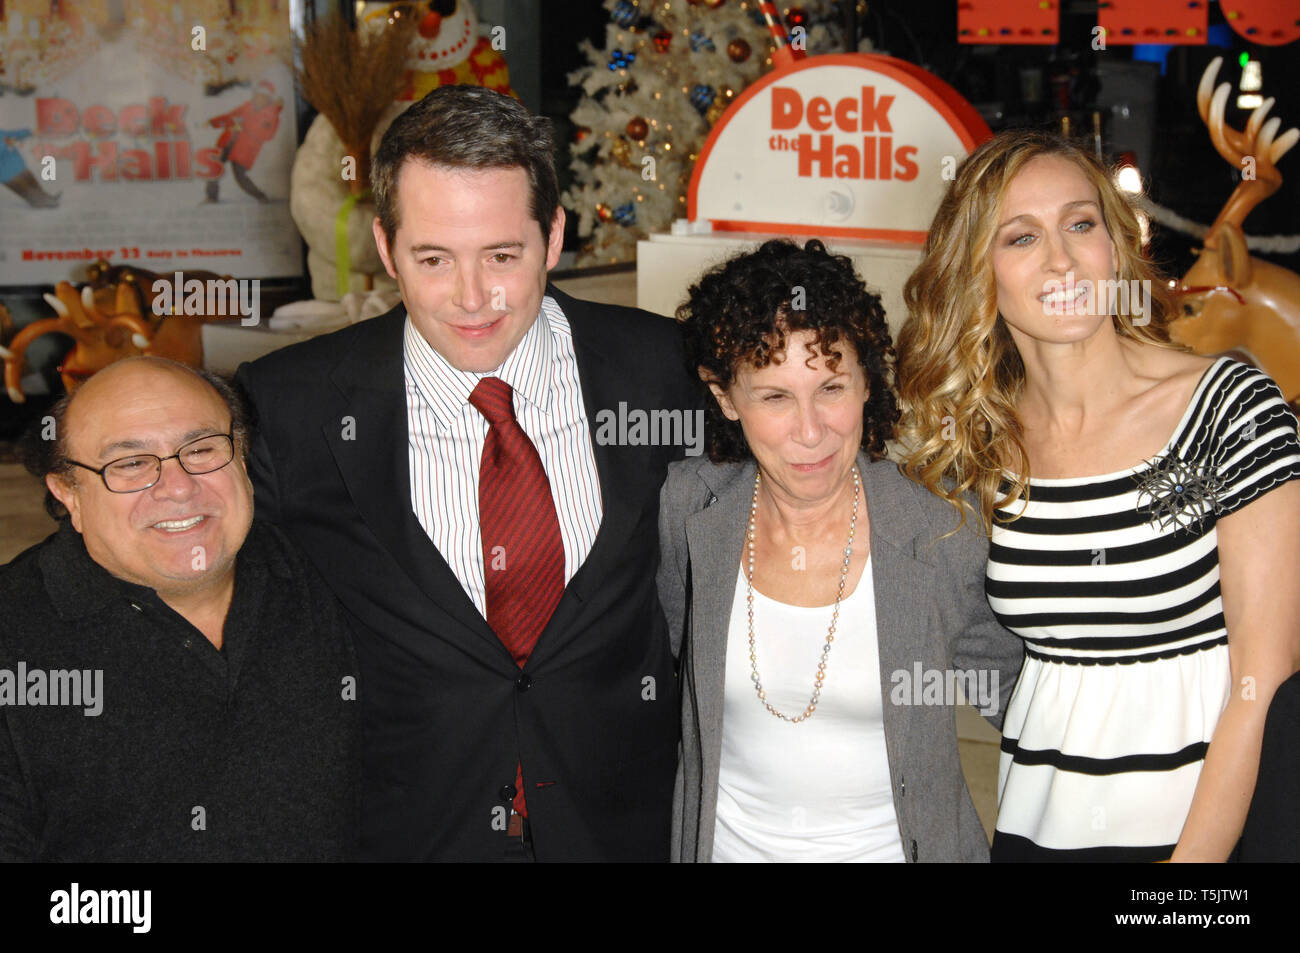 LOS ANGELES, CA. November 12, 2006: DANNY DEVITO (left), MATTHEW BRODERICK, RHEA PERLMAN & SARAH JESSICA PARKER at the world premiere of their new movie 'Deck the Halls' at Grauman's Chinese Theatre, Hollywood. Picture: Paul Smith / Featureflash Stock Photo